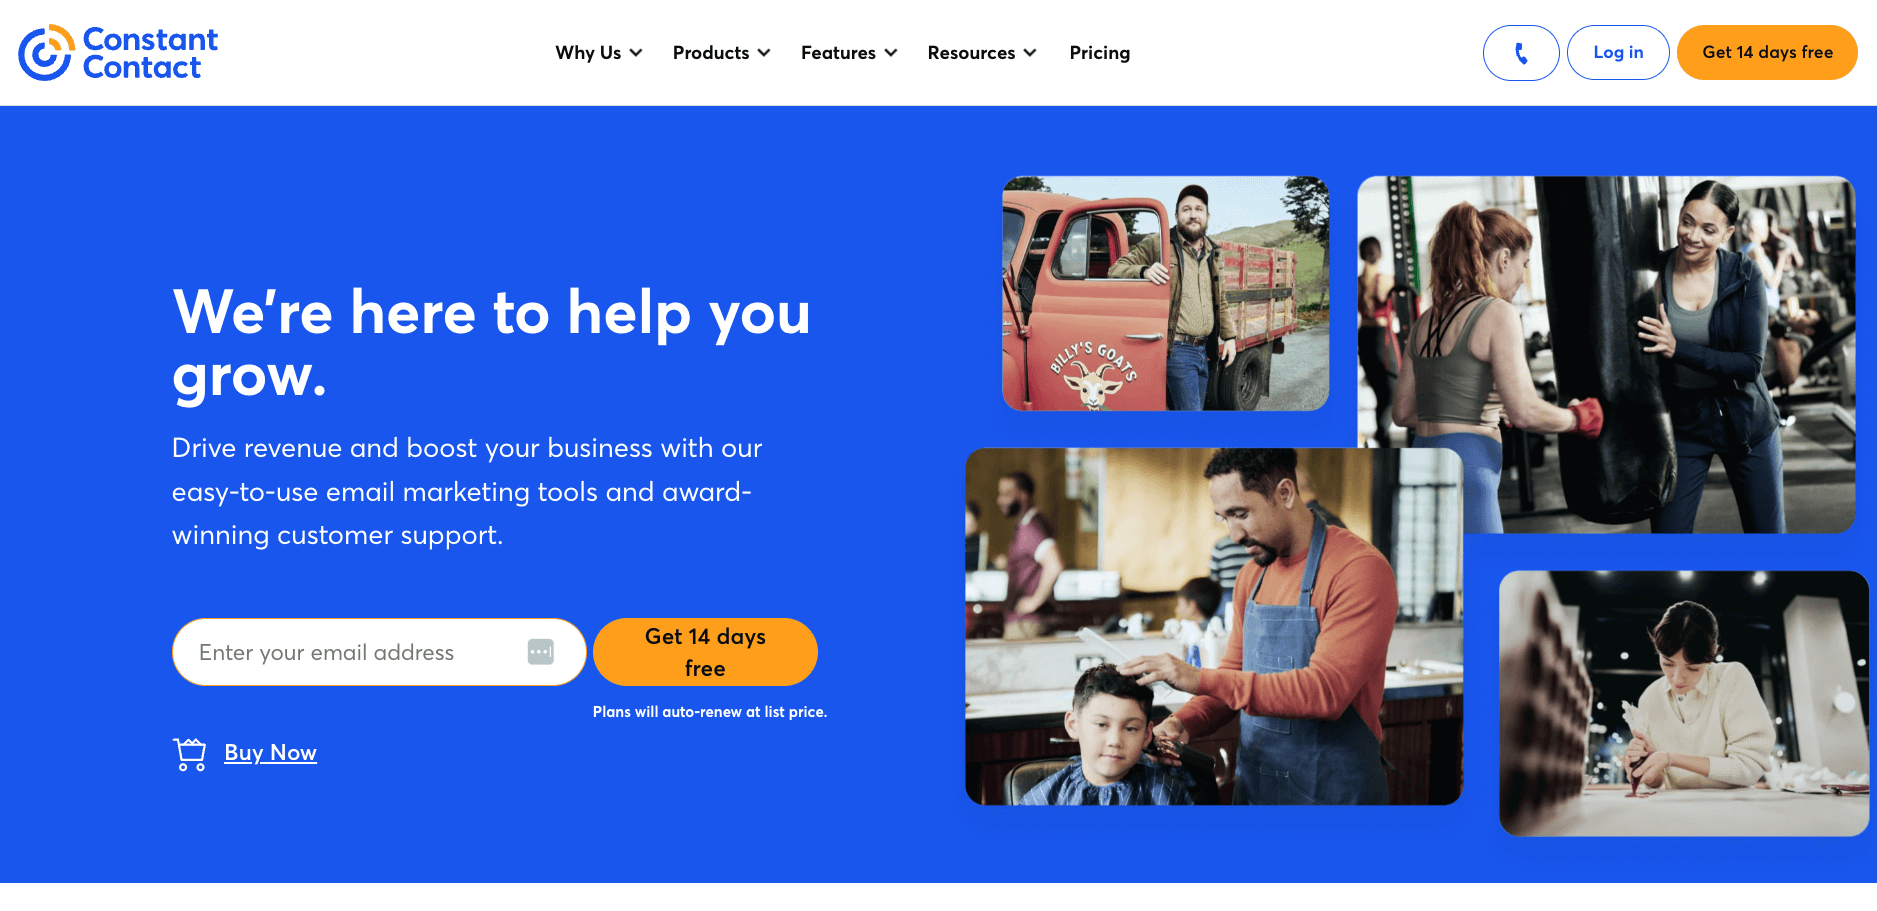 Constant Contact homepage.